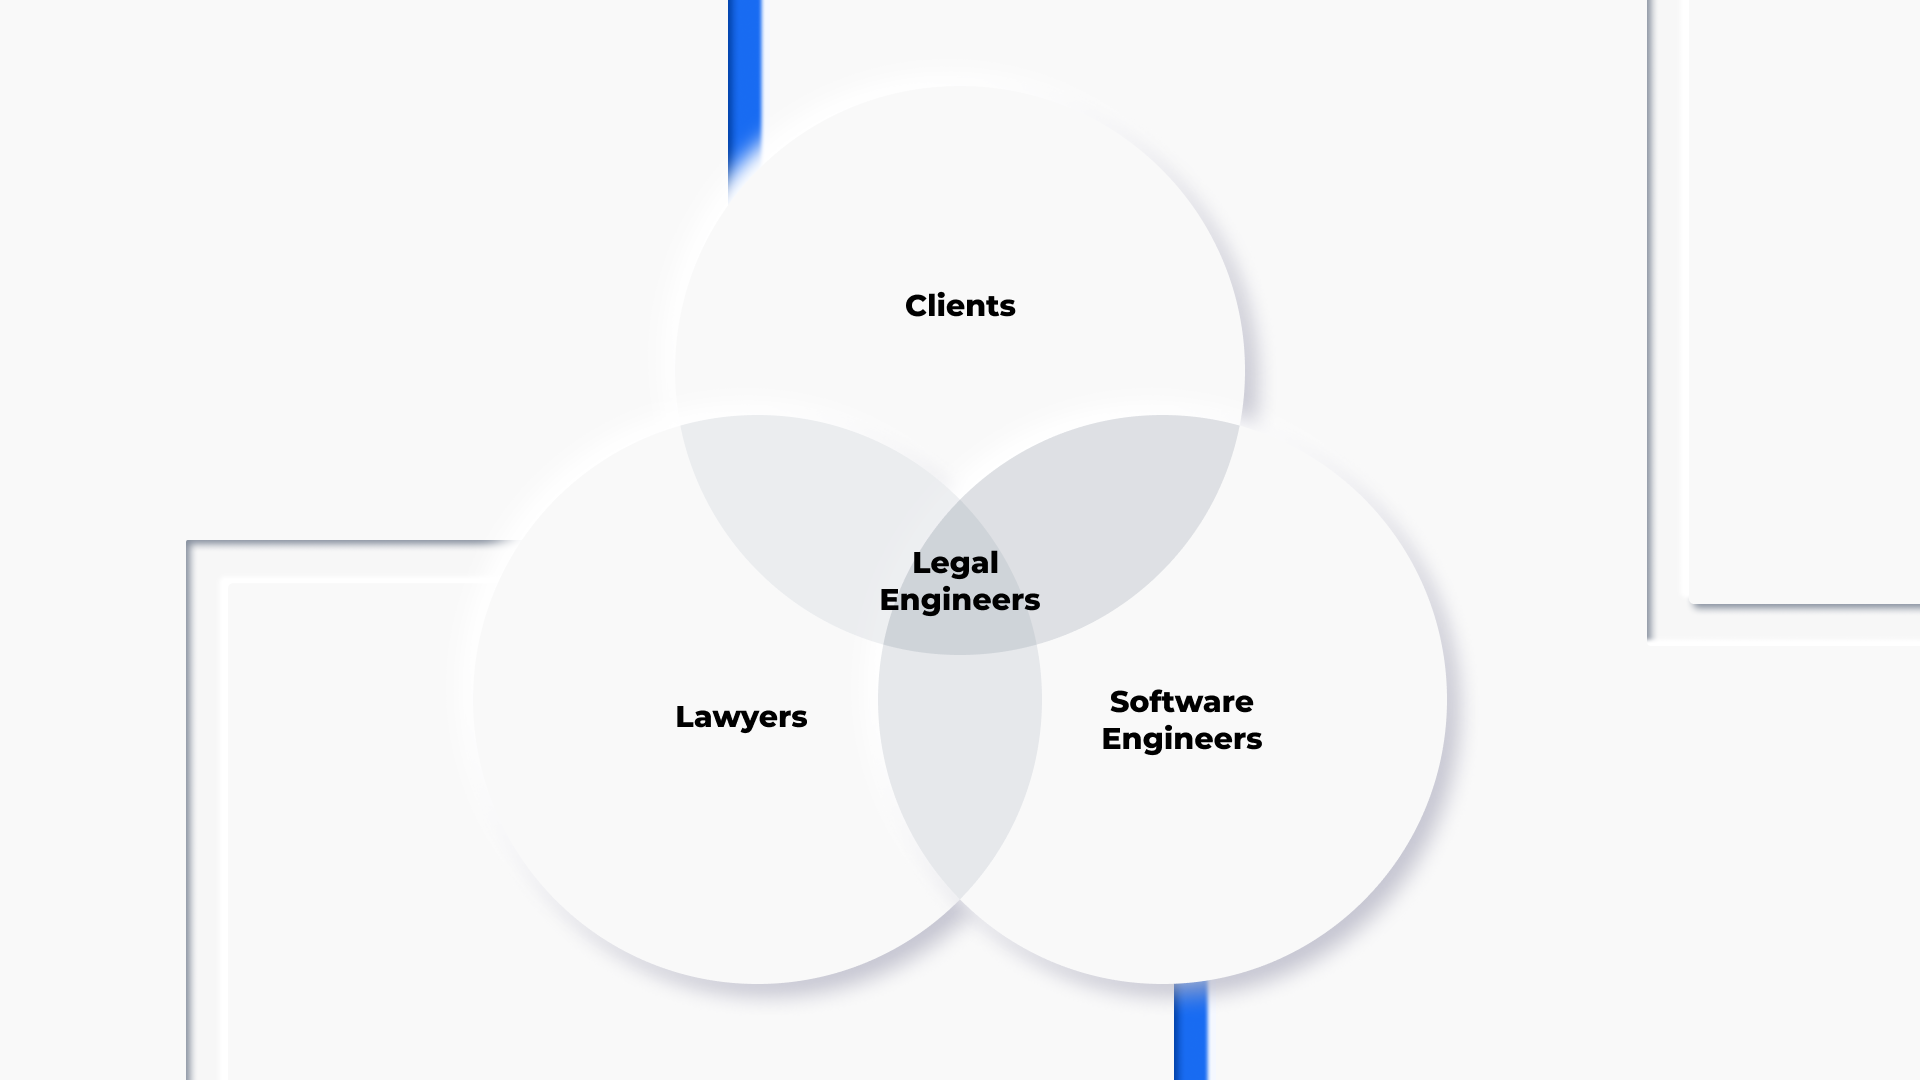 Legal engineers are at the nexus of legal expertise, software engineering, and client service.